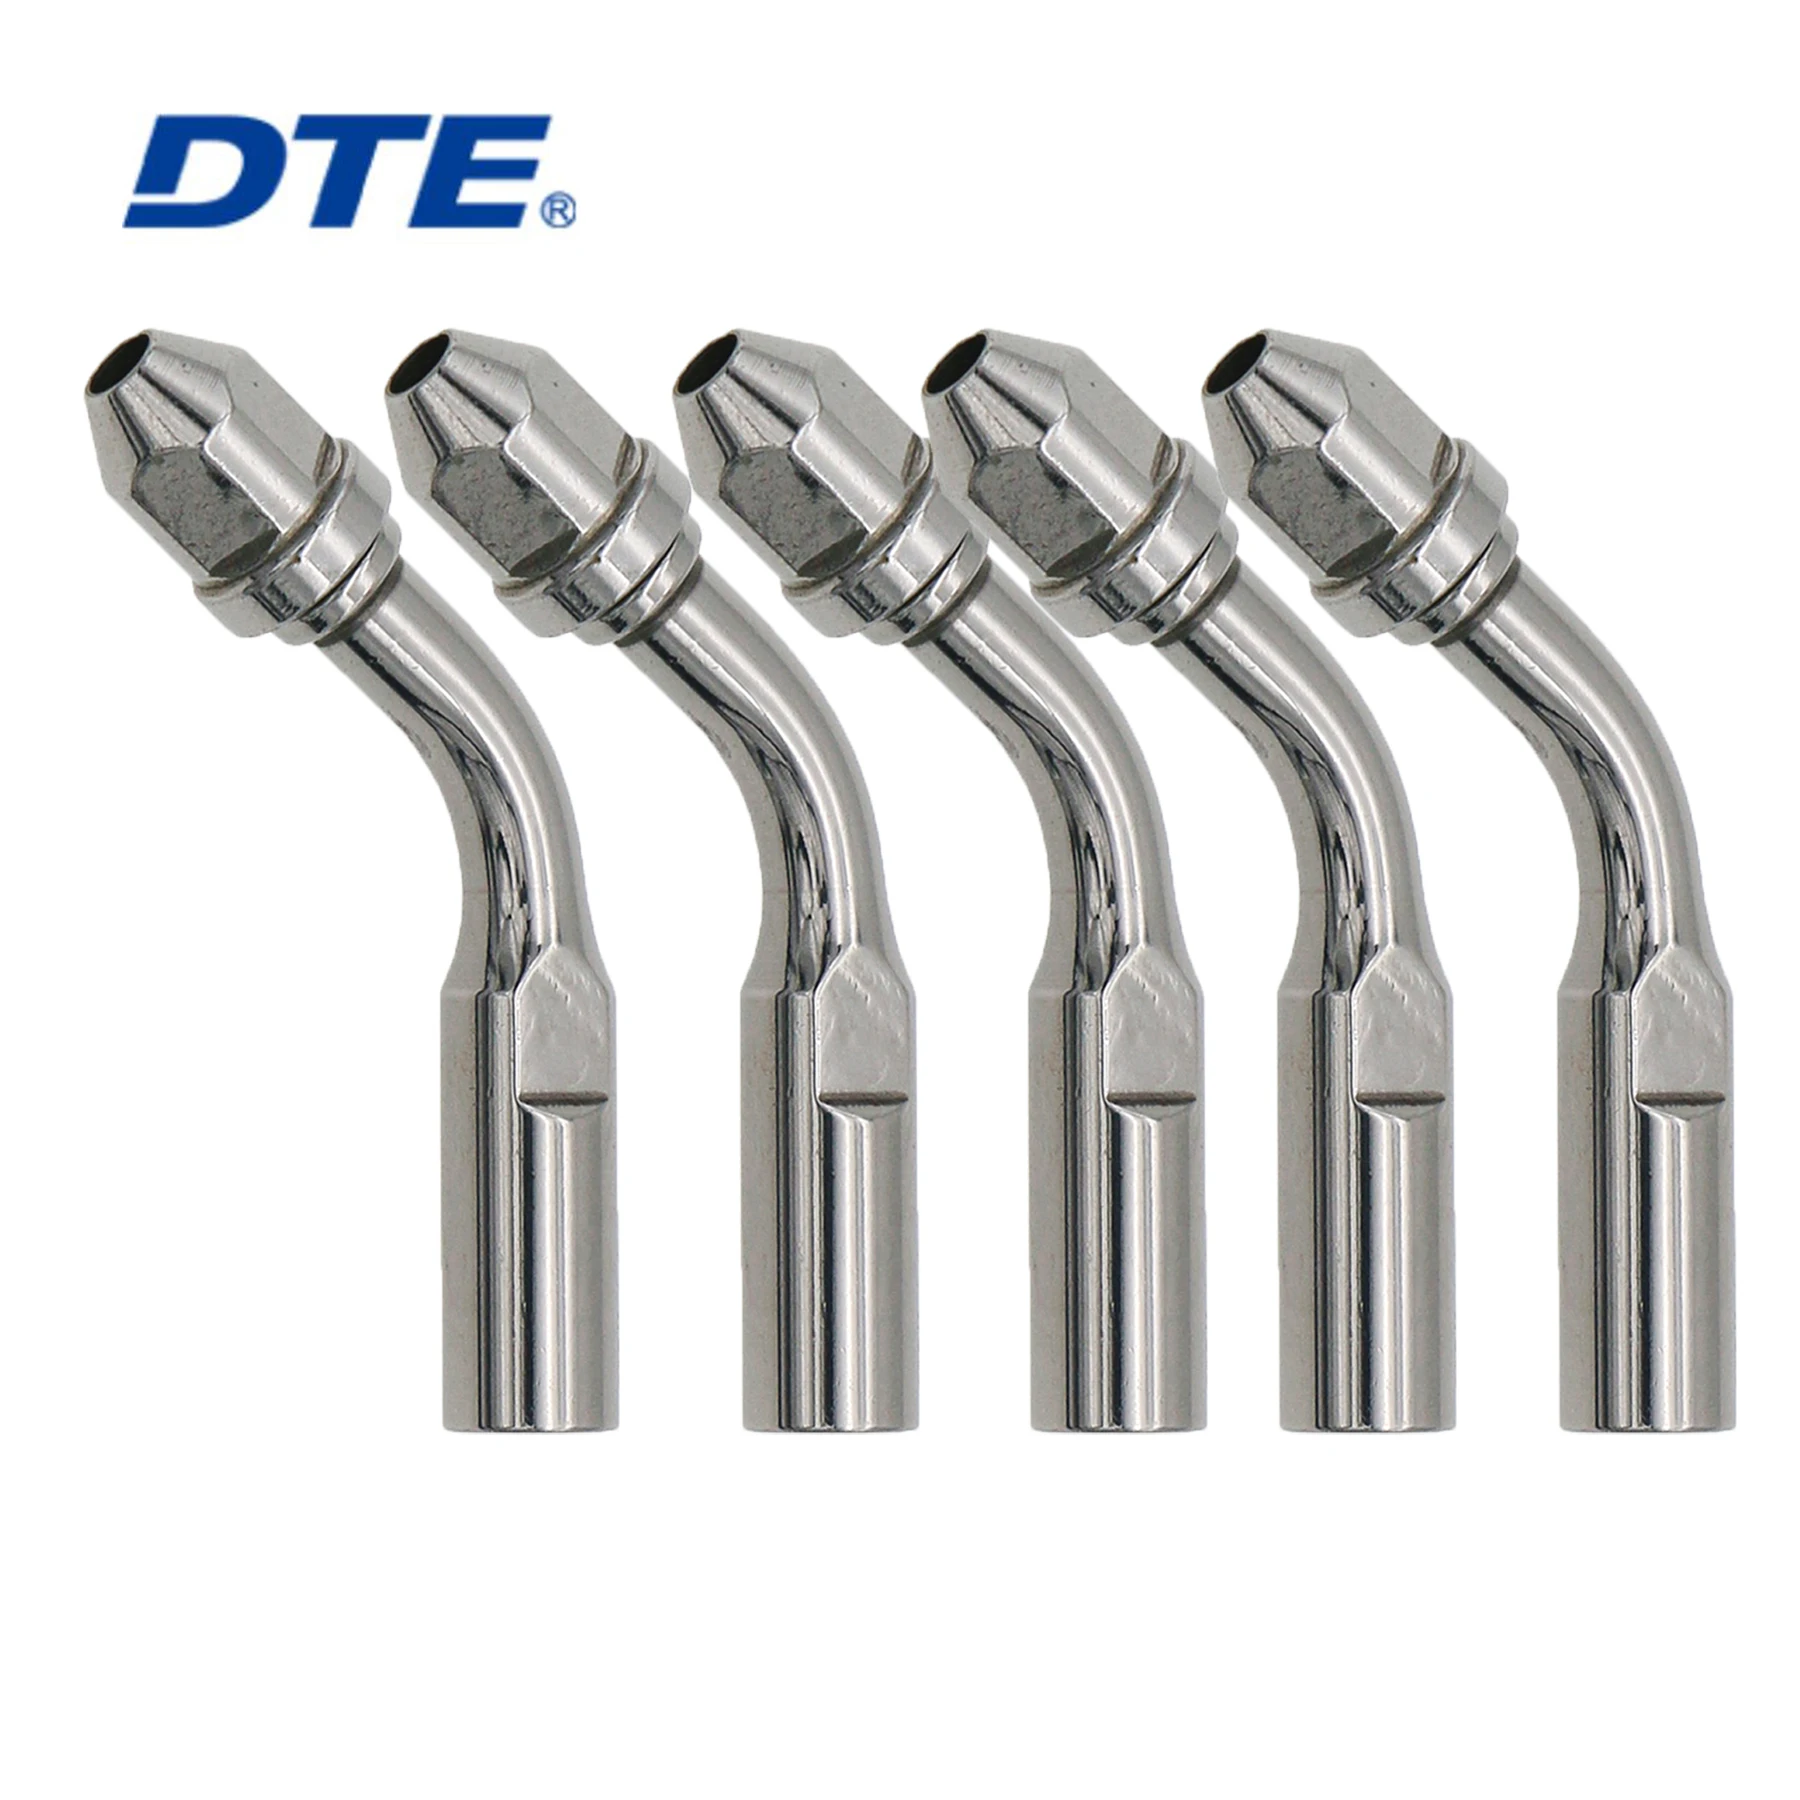 DTE Dental Ultrasonic Scaler Tip ED8 Root Canal Periodontics Endodontics Periodontal Supplies Tools Compatible With NSK SATELEC